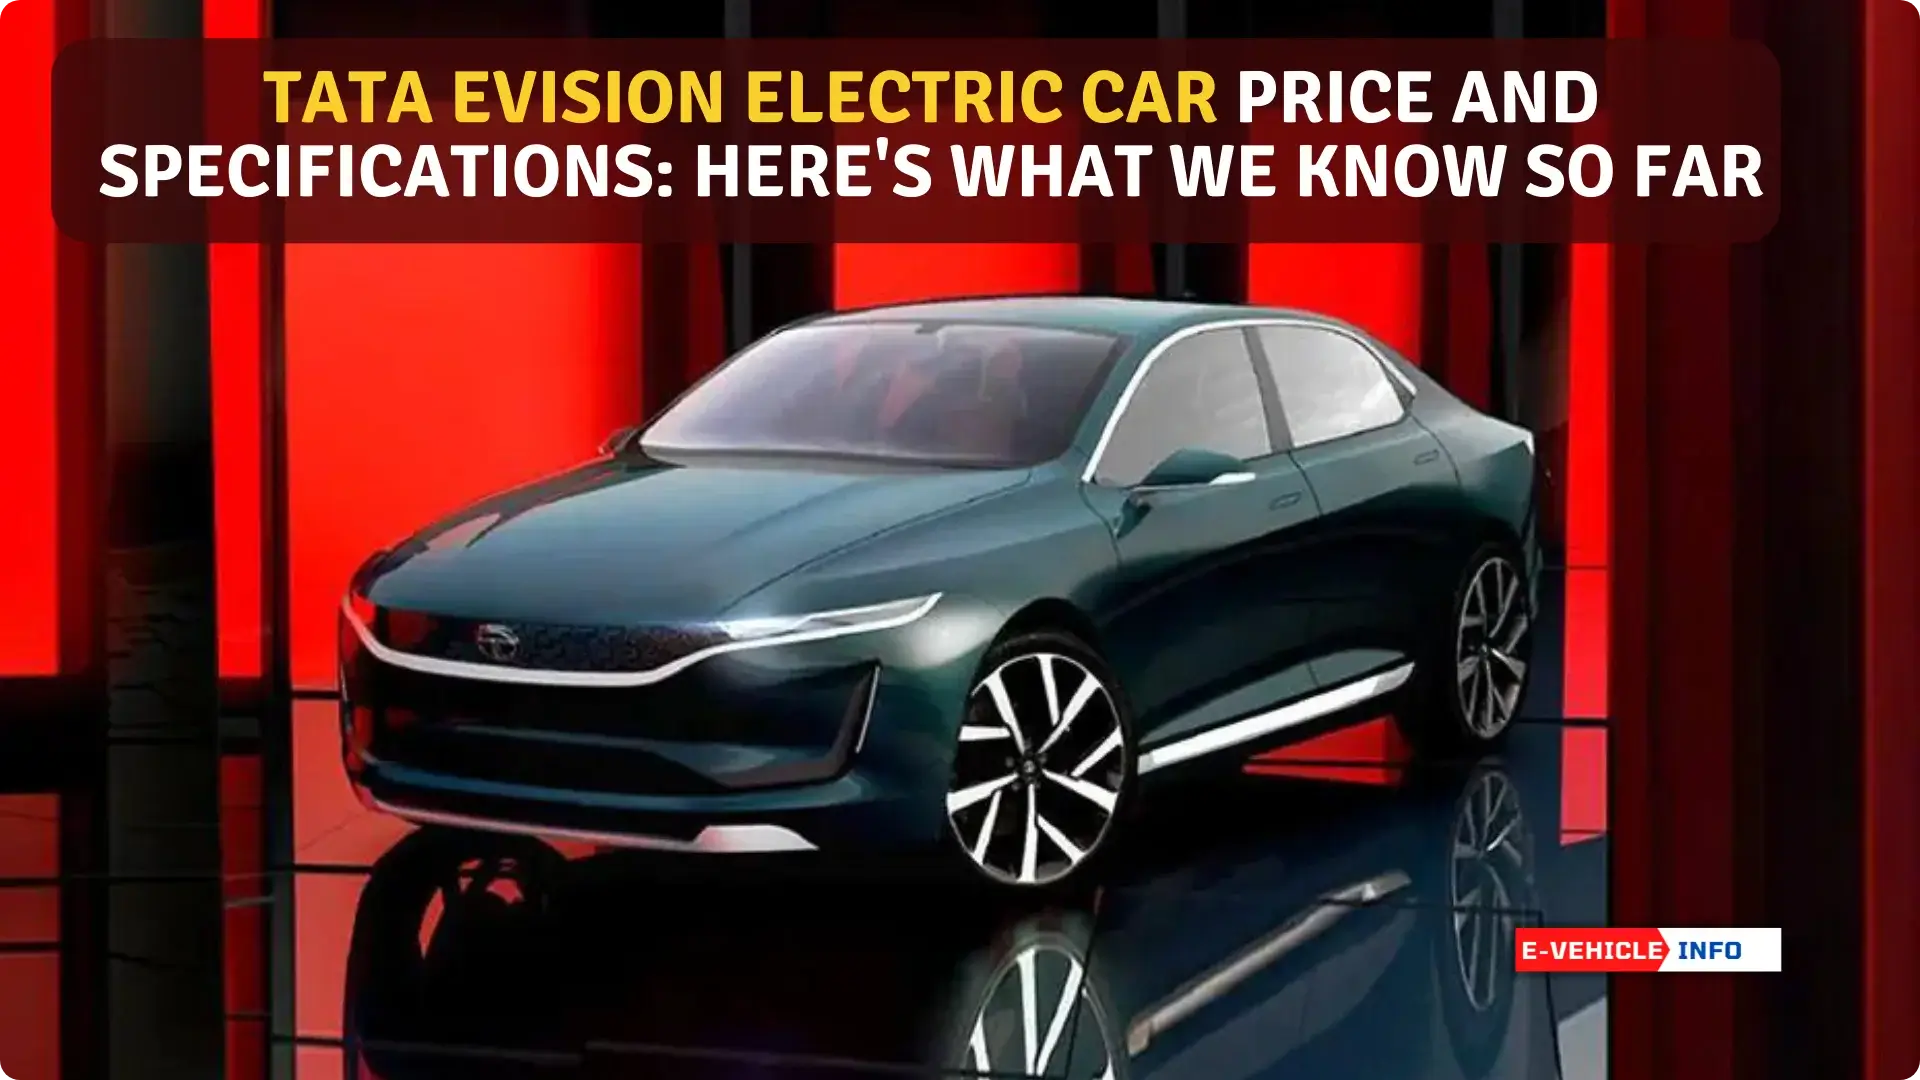 https://e-vehicleinfo.com/tata-evision-electric-car-price-and-specifications/